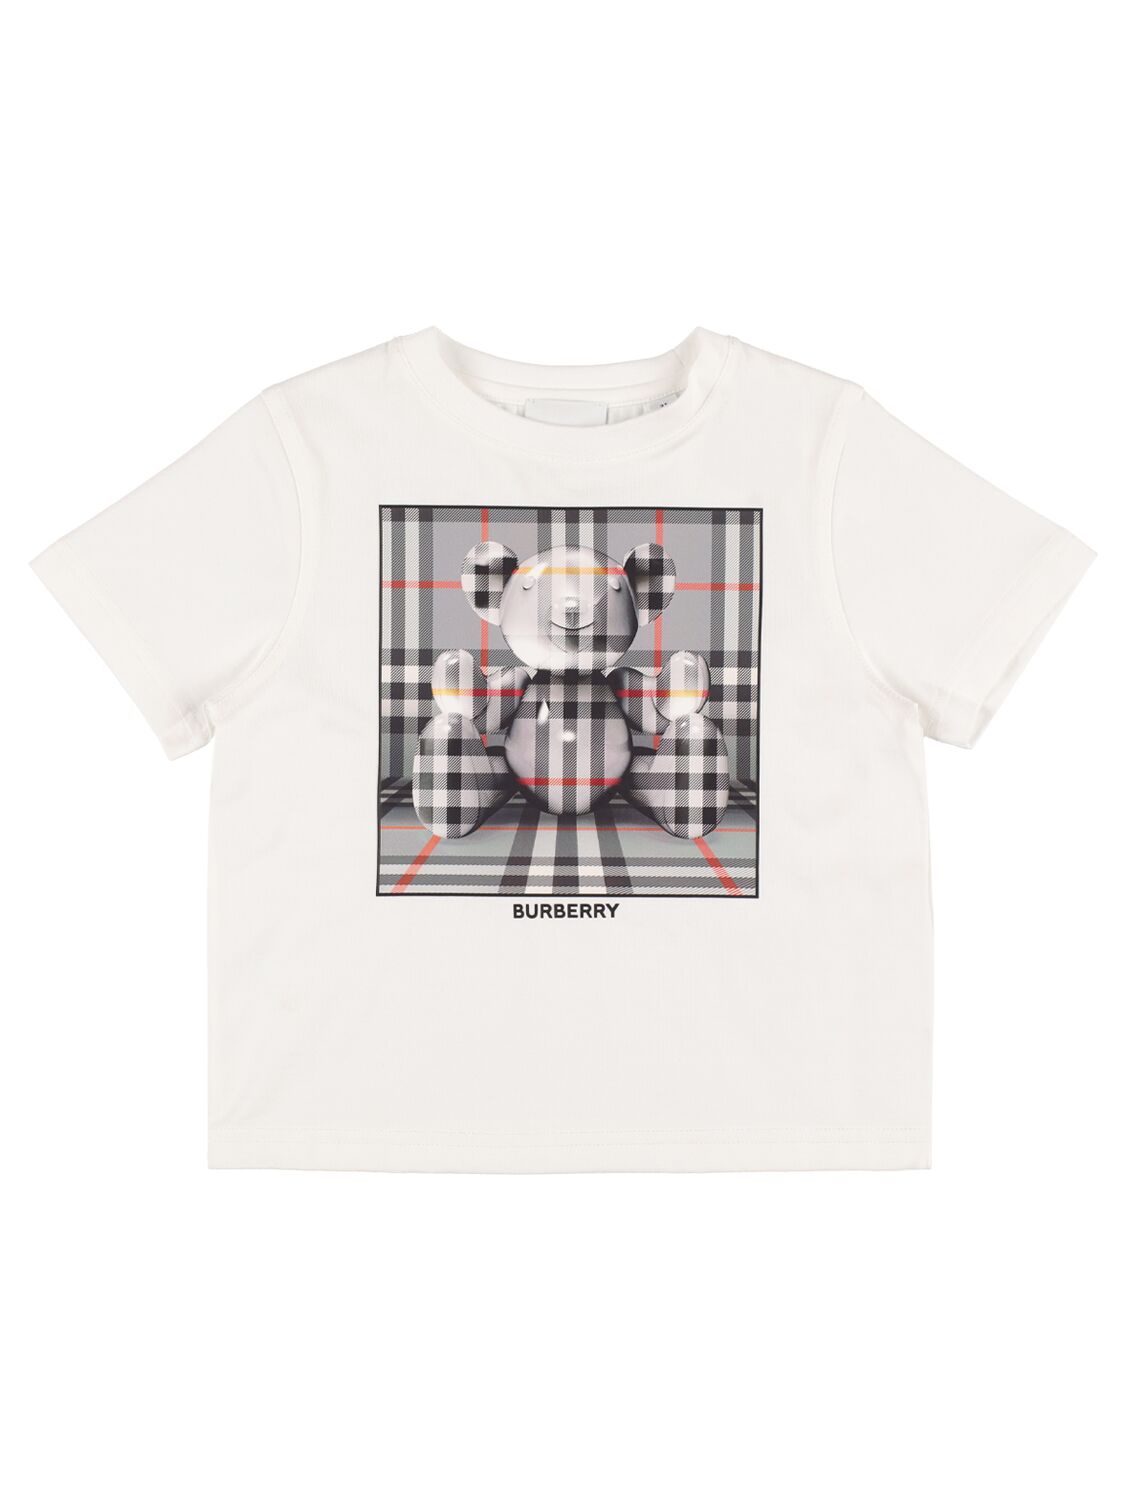 Burberry White T-shirt For Kids With Logo Print